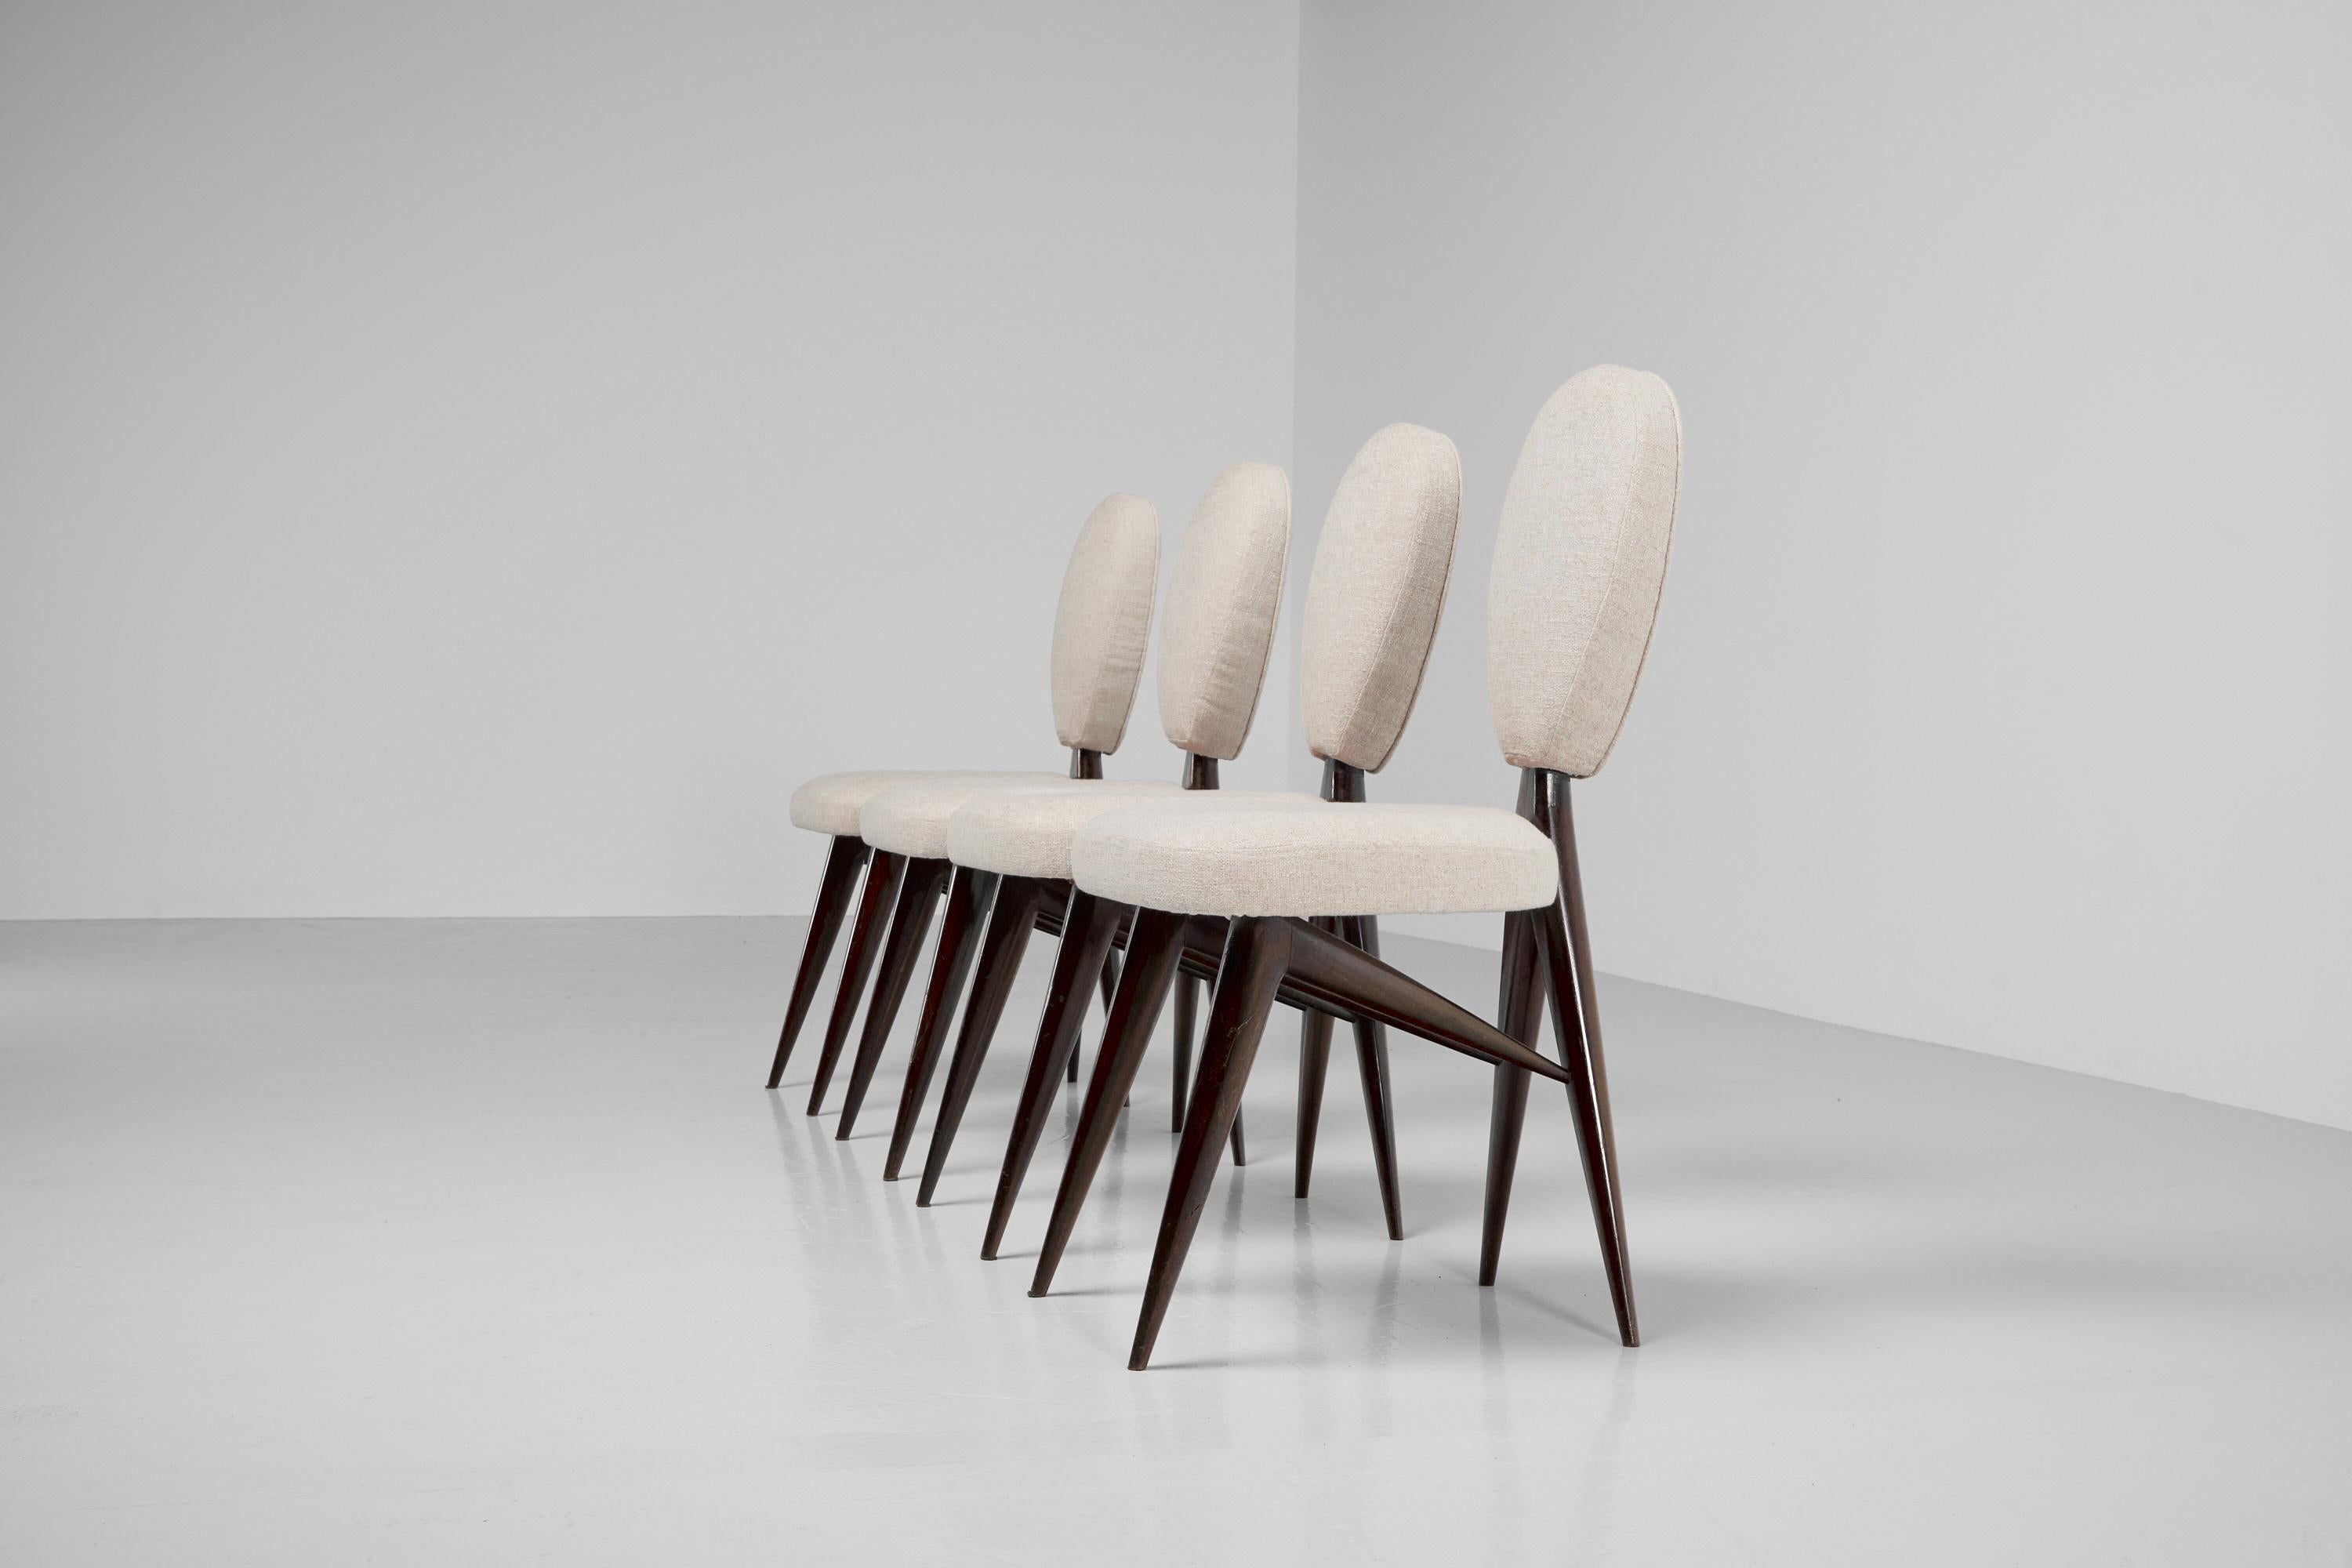 Giuseppe Scapinelli dinner chairs with spine feet Brazil 1950 For Sale 2